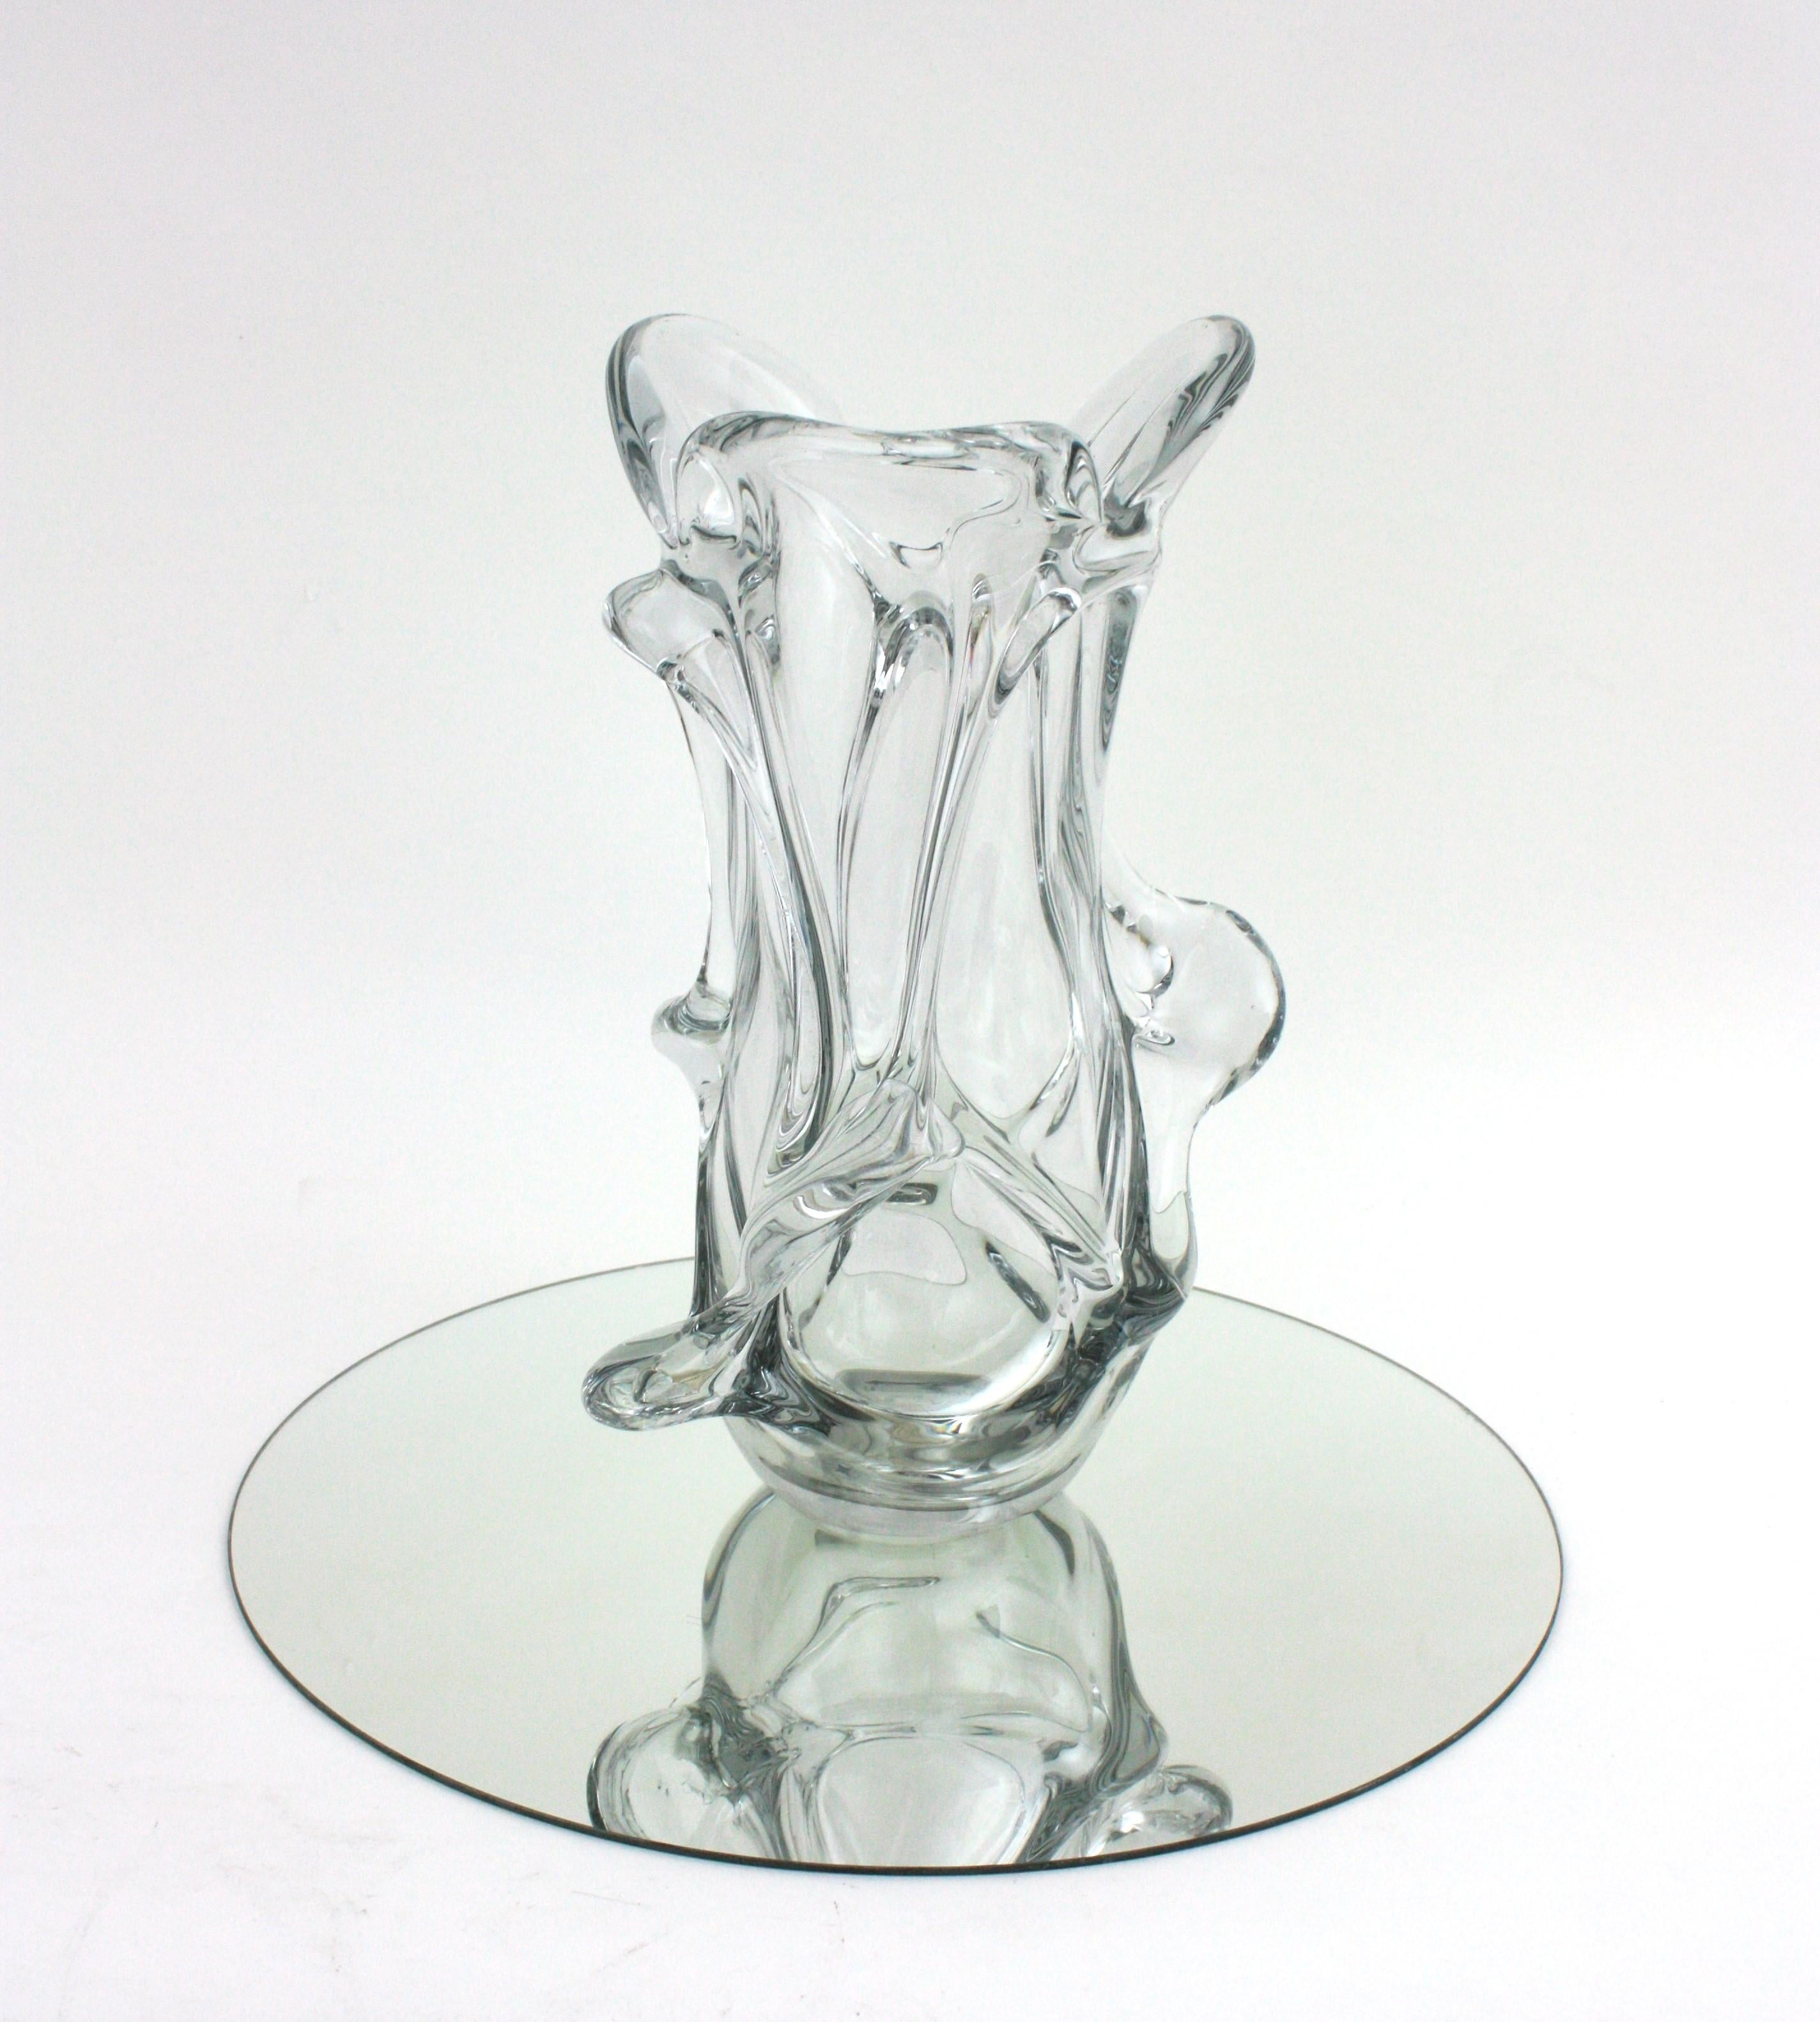 Large Murano Organic Shaped Vase in Clear Glass, 1950s For Sale 4